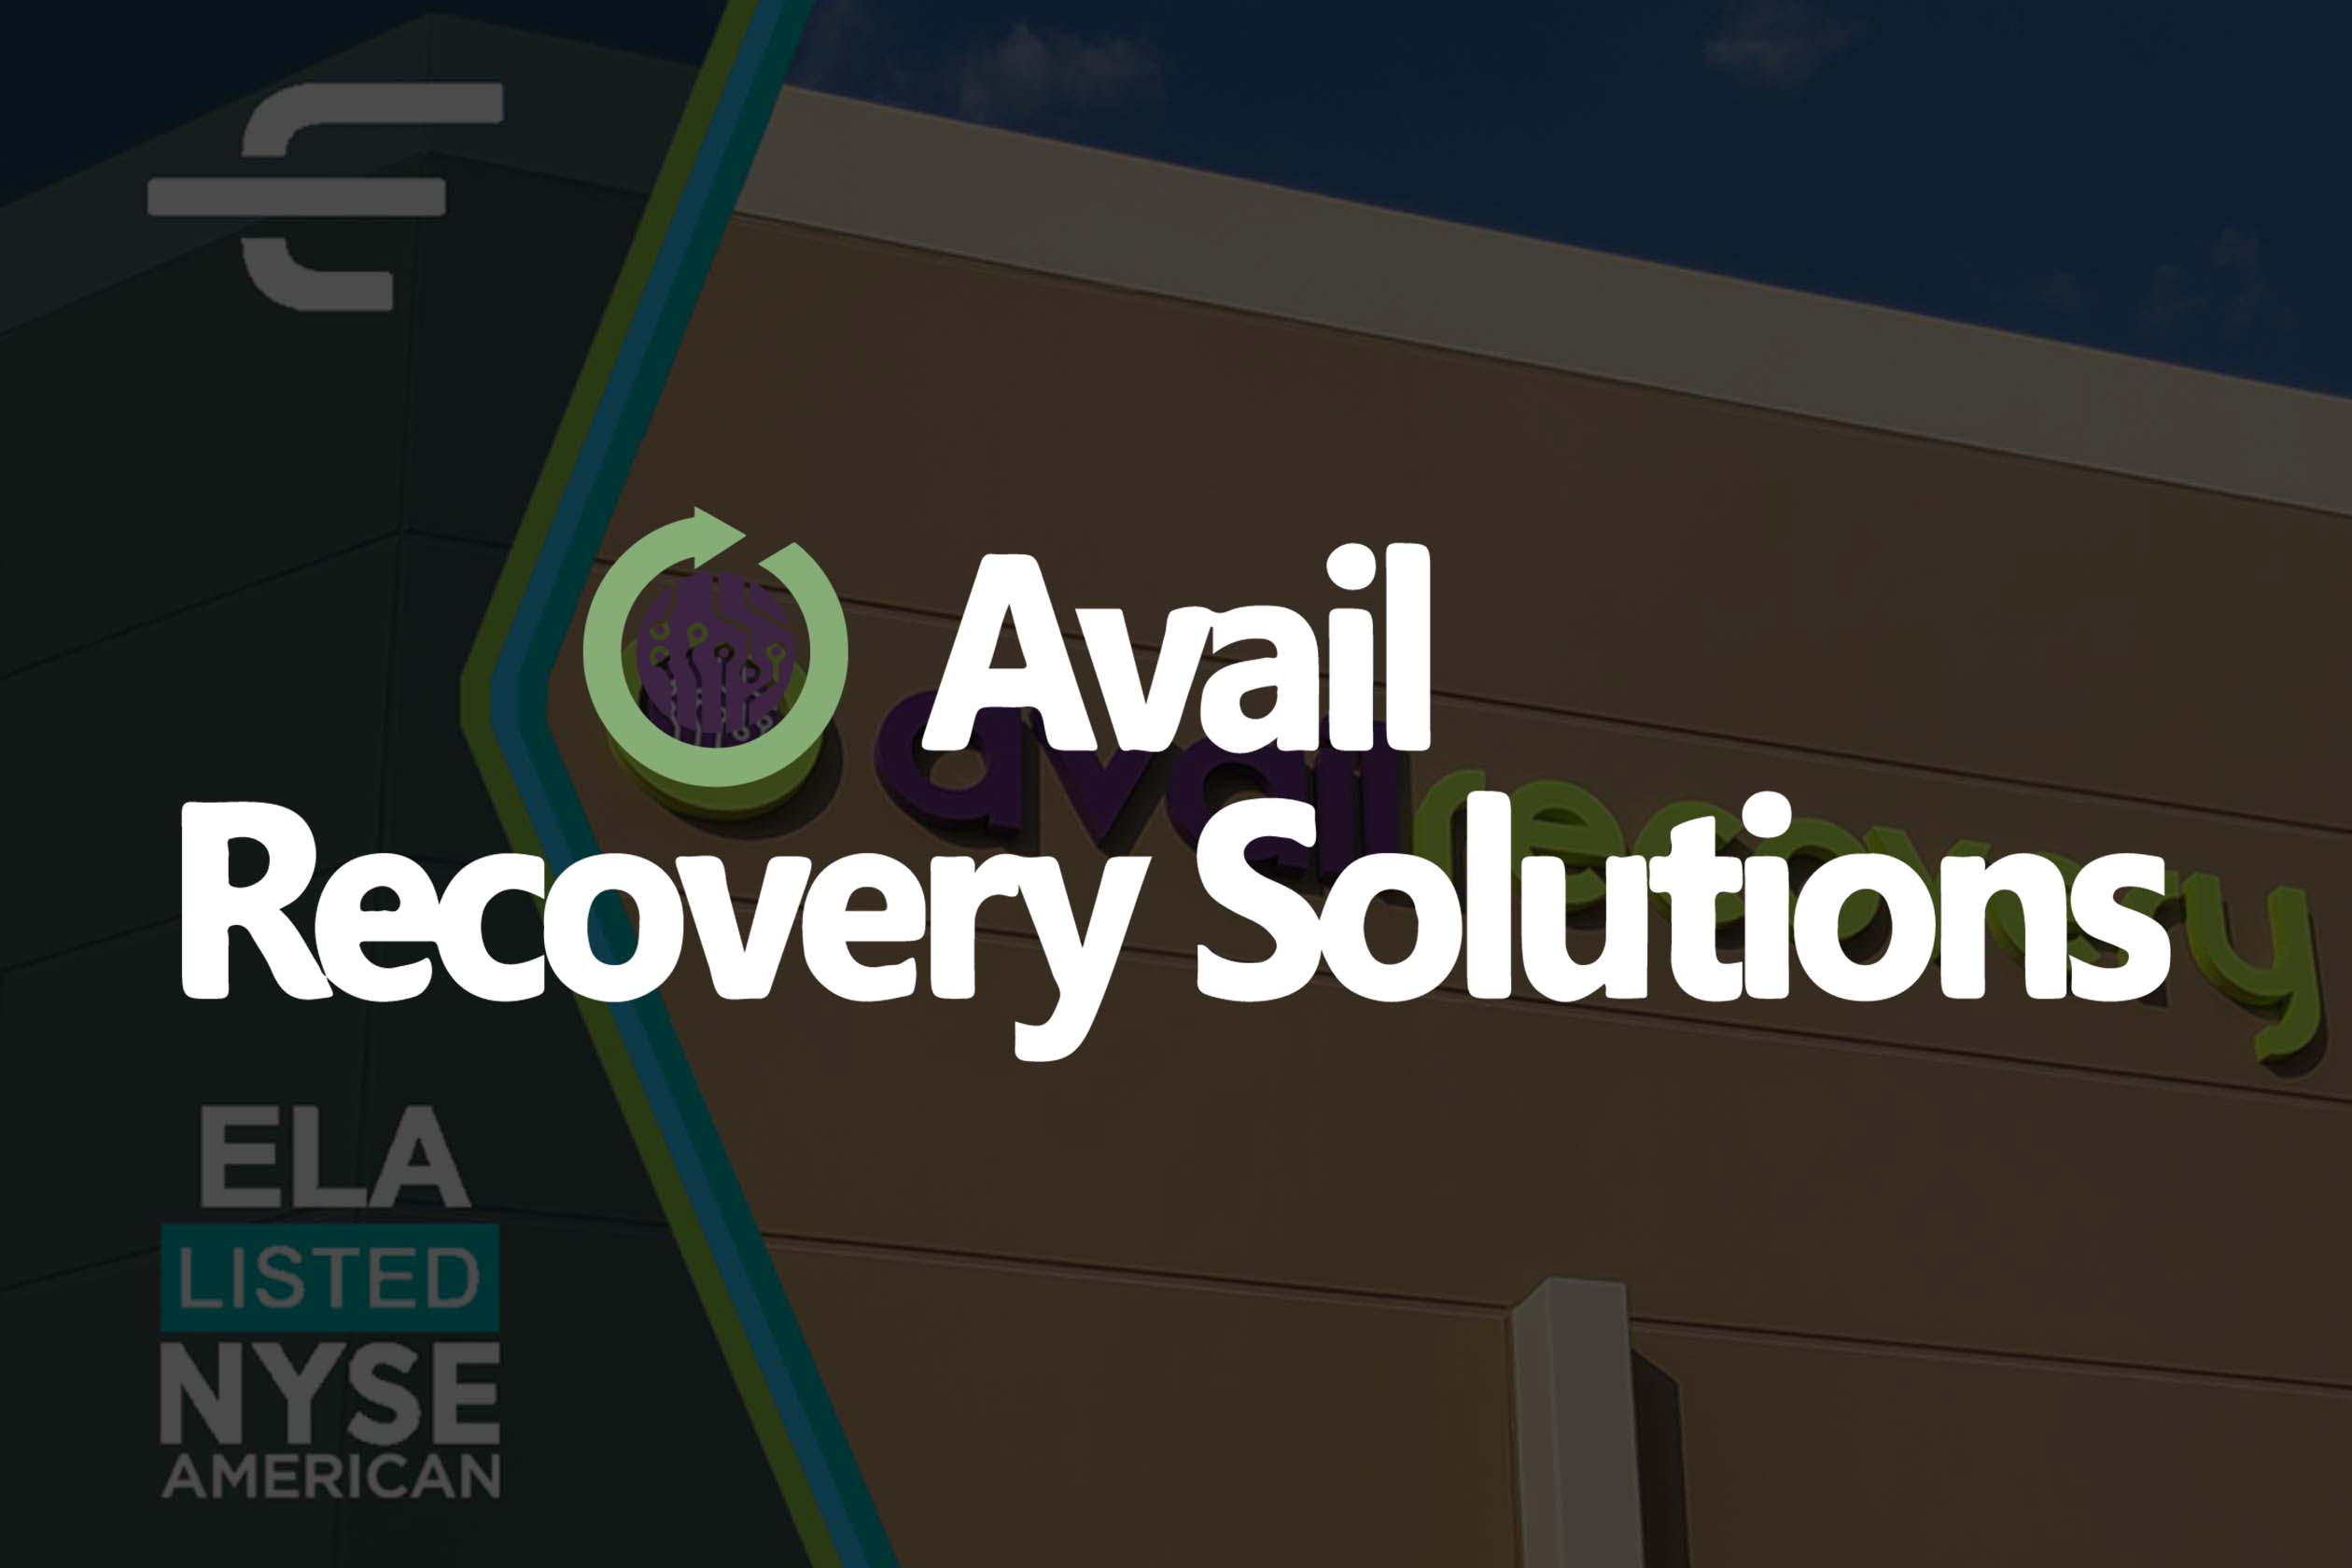 Headquartered in Arizona, Avail Recovery Solutions is comprised of IT industry enthusiasts with decades of experience in providing IT asset disposition (ITAD), product resale and support services.